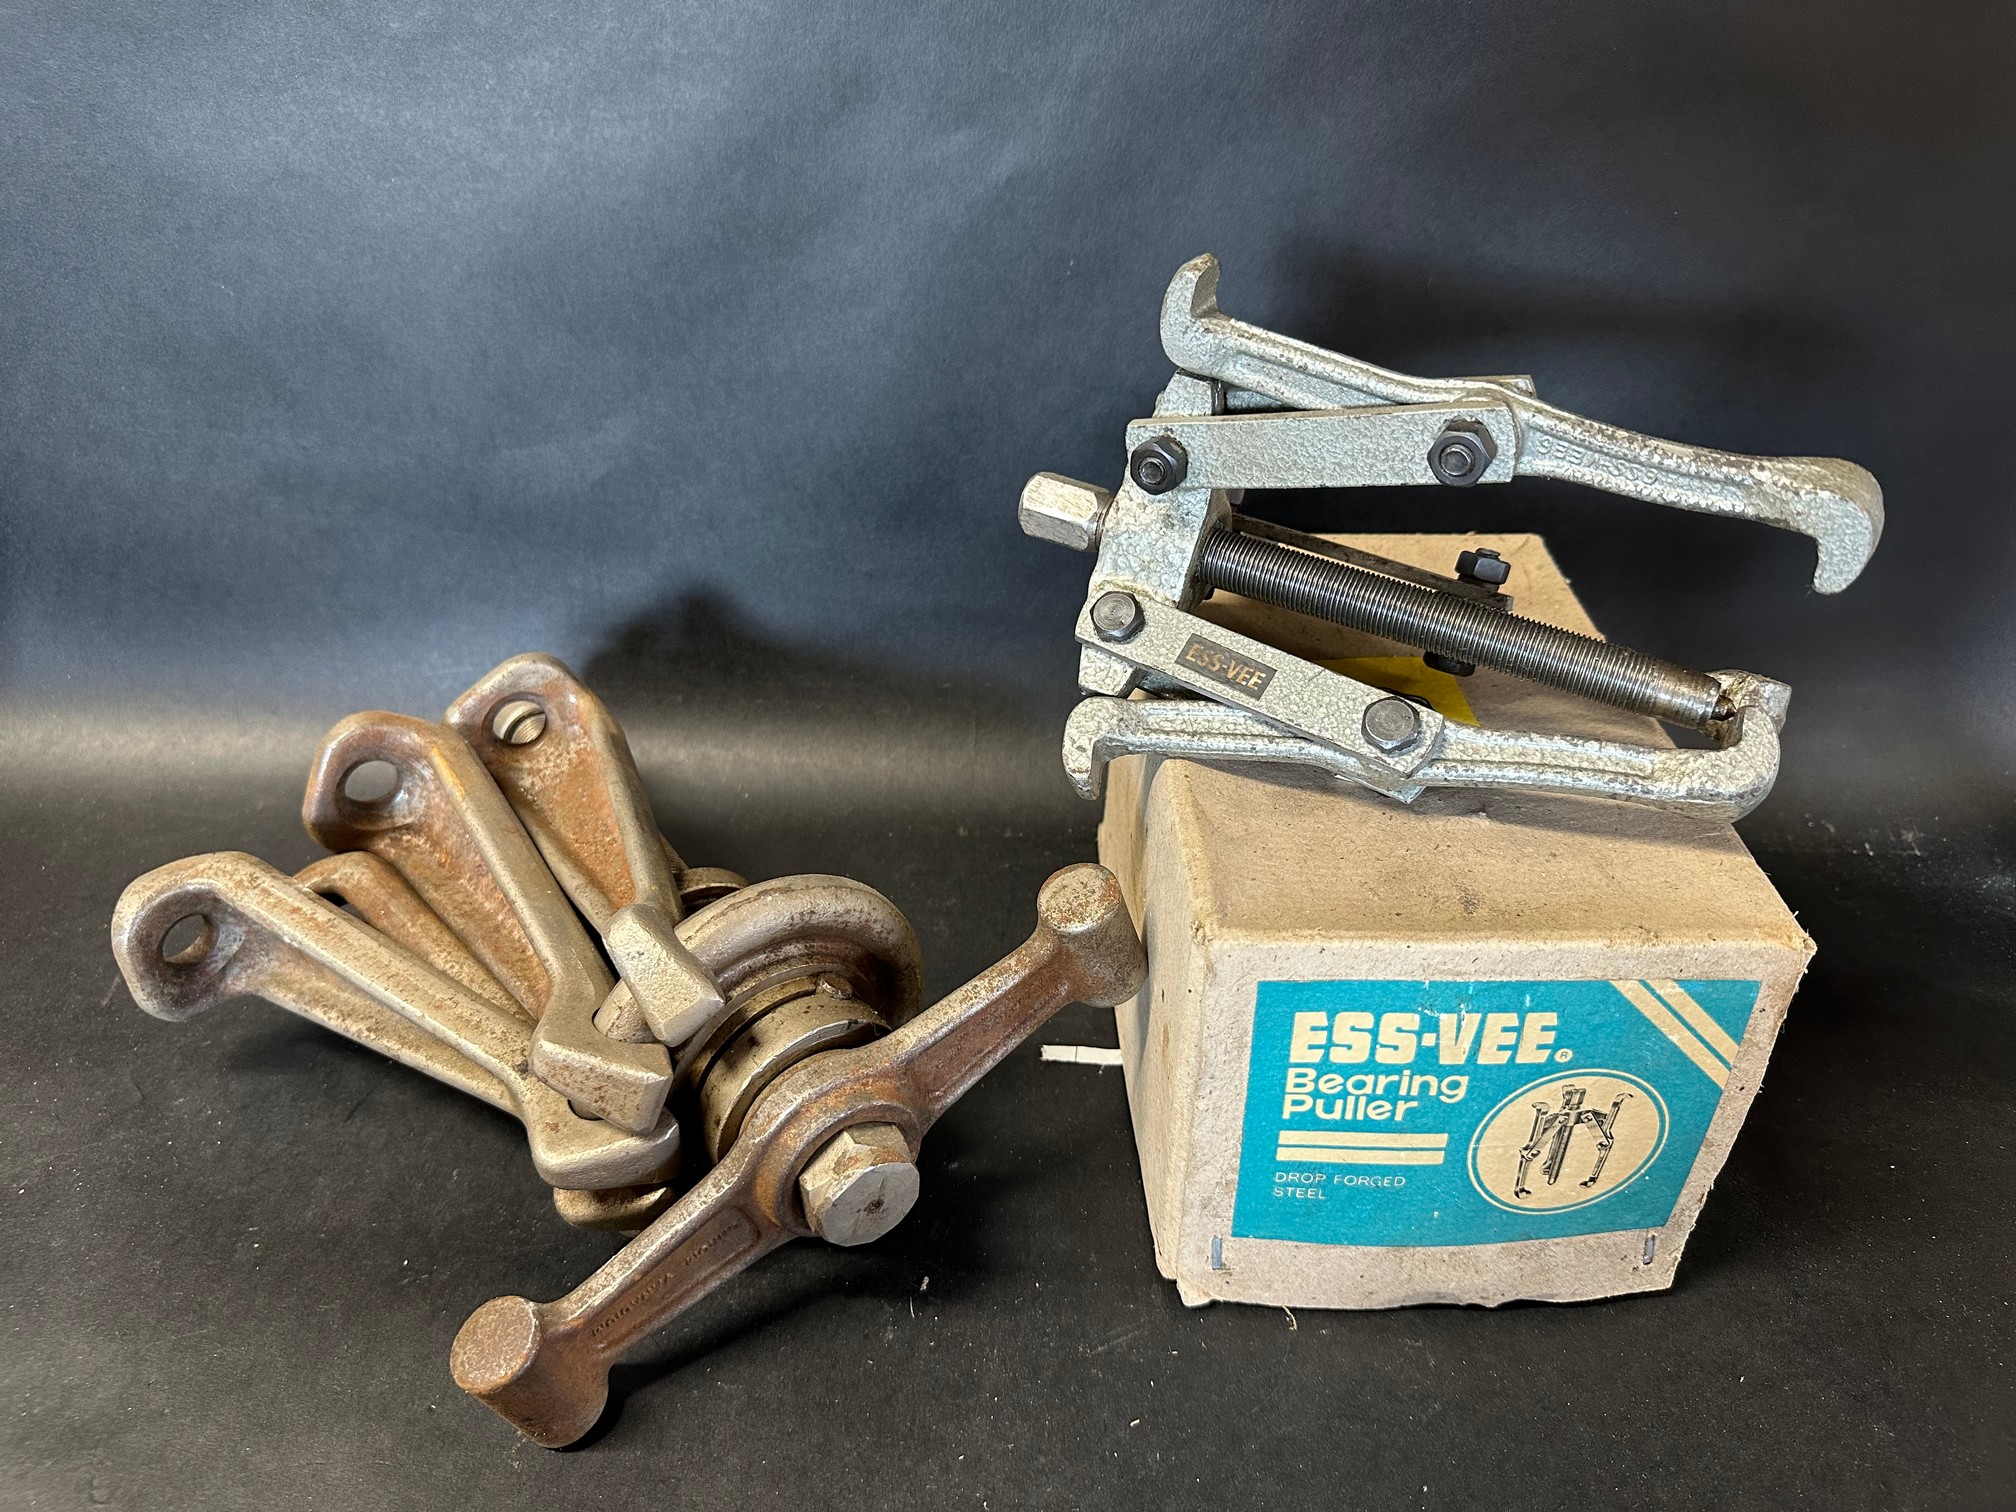 A hub puller made for a Jowett, plus a boxed Ess-Vee bearing puller.